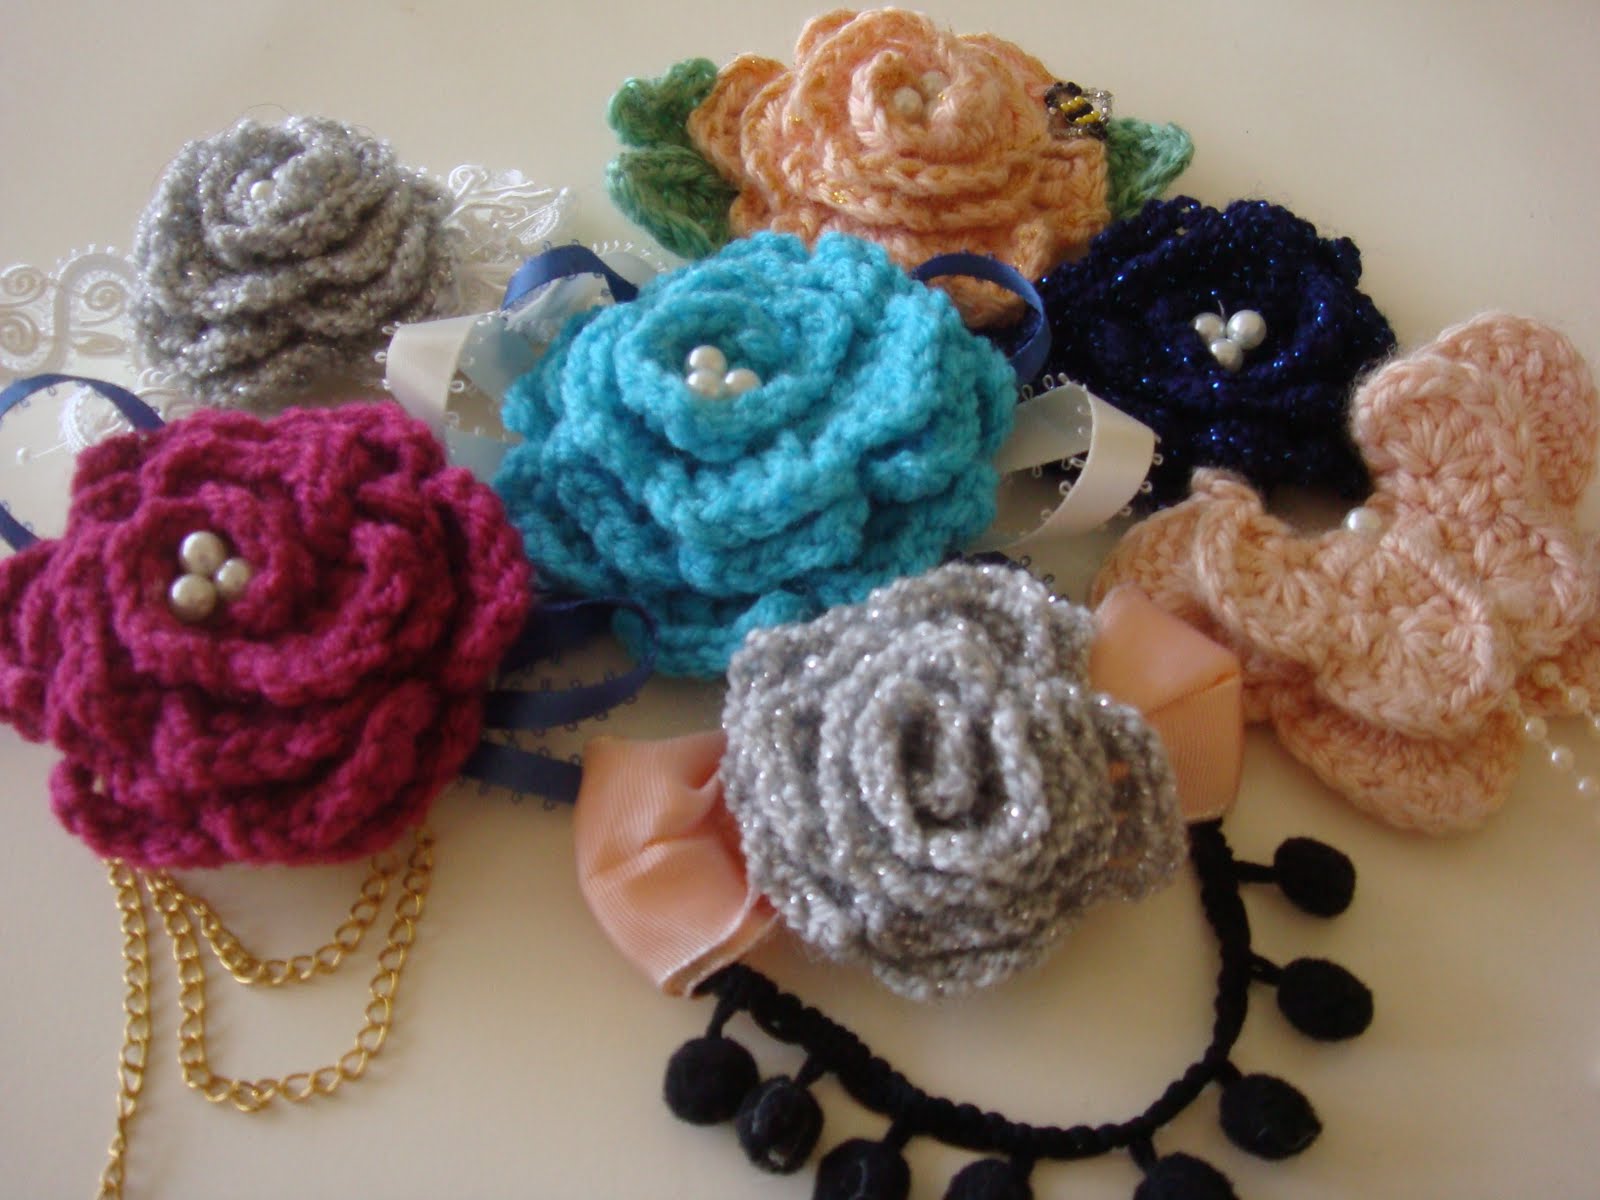 Recycled DIY crochet accessories part 2